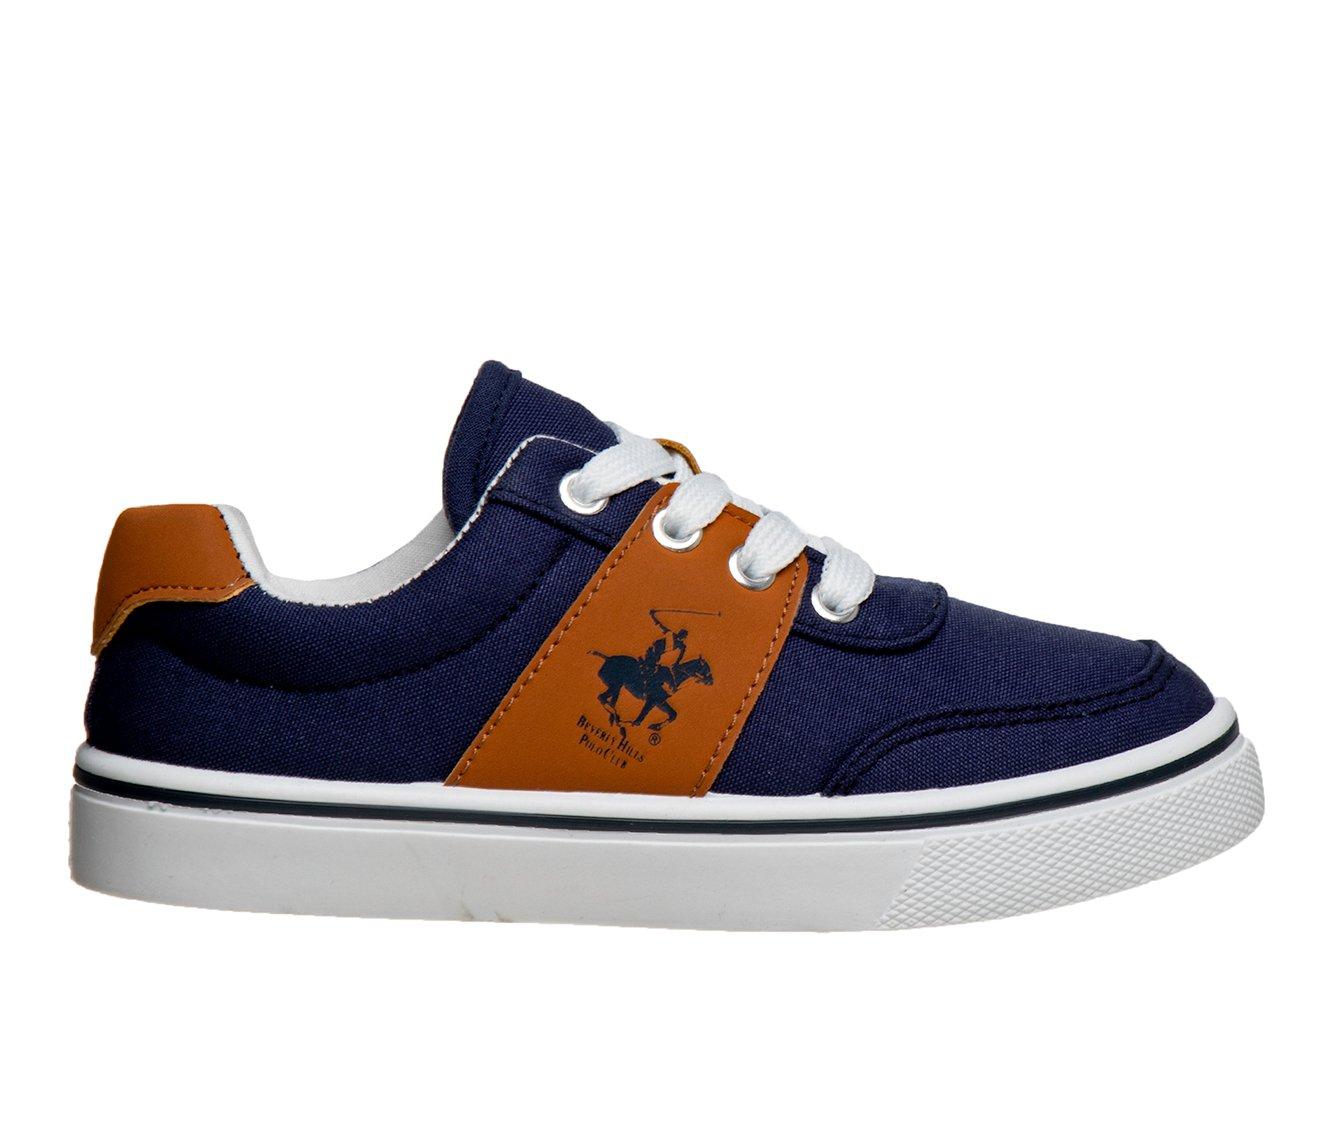 Boys' Beverly Hills Polo Club Little Kid & Big Kid Lace-Up Casual Sneakers